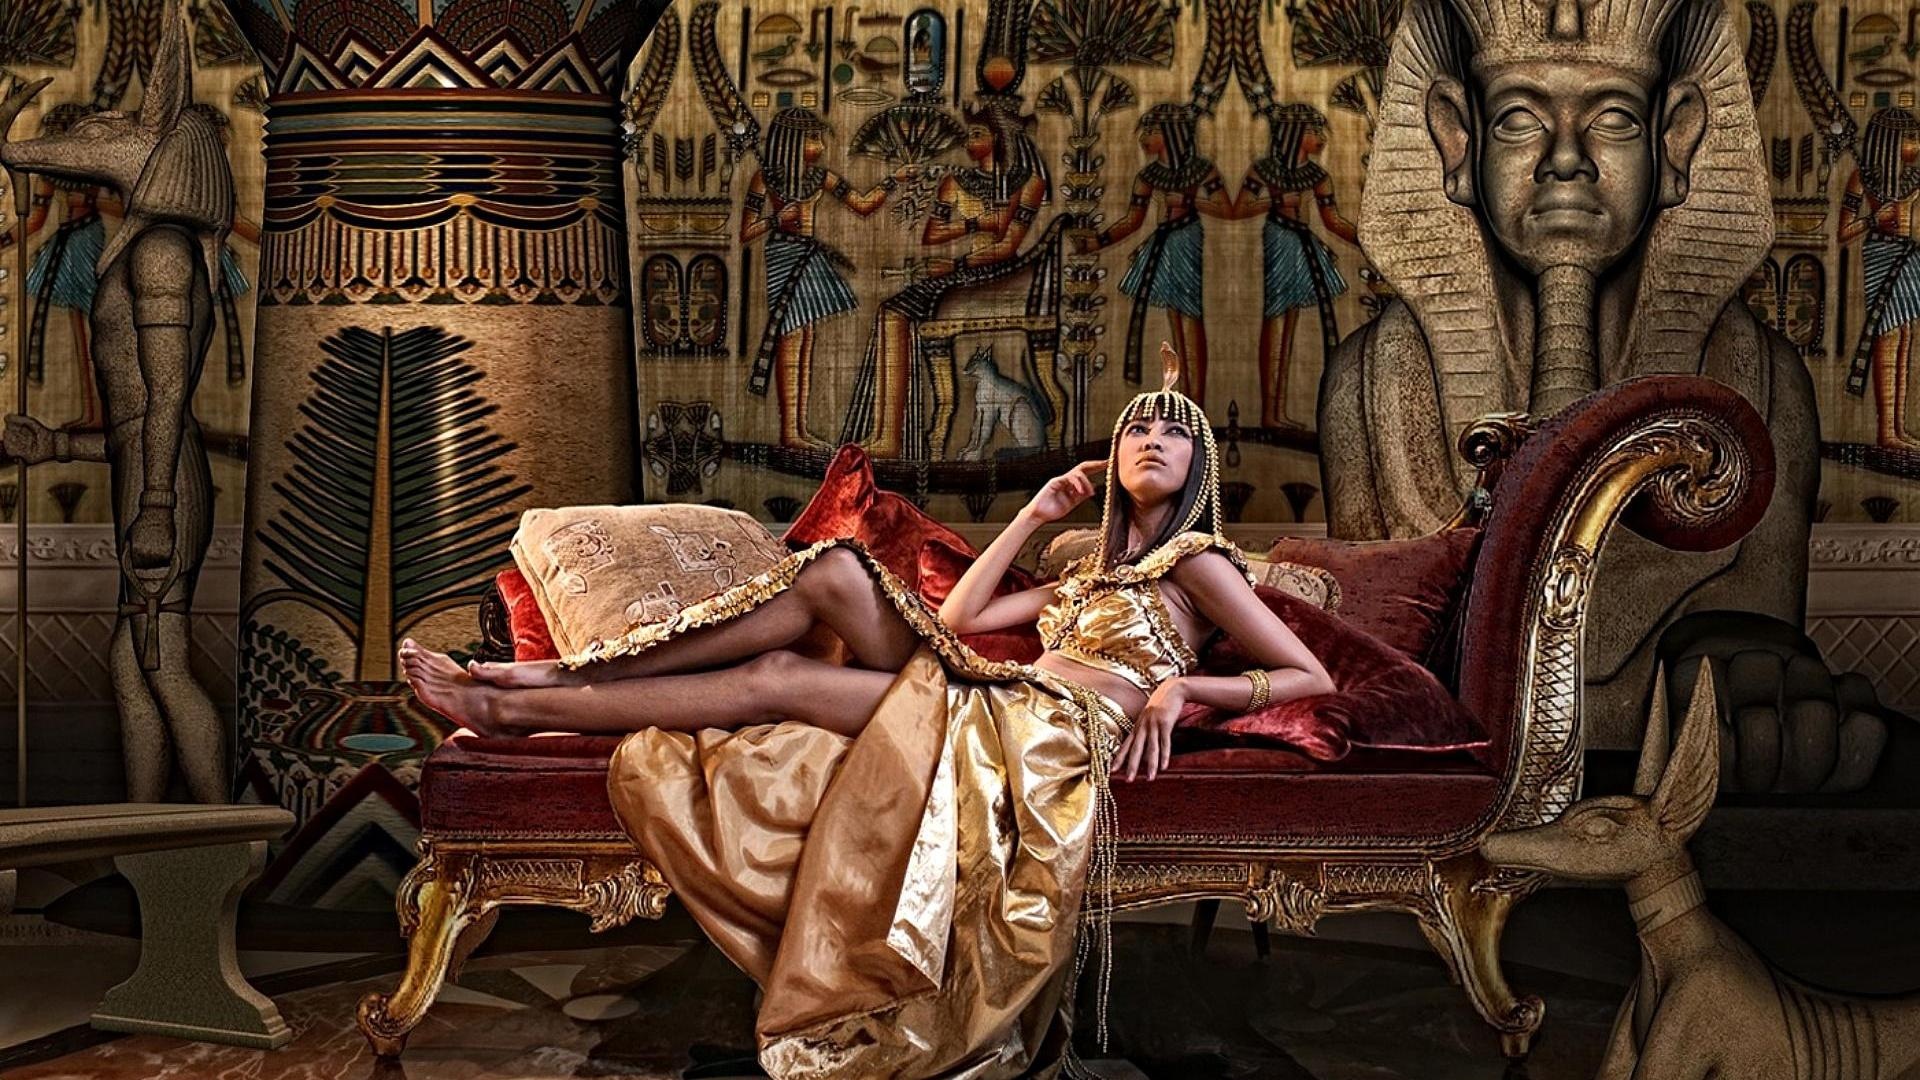 Cleopatra visuals, Royalty personified, Historical significance, Cultural icon, 1920x1080 Full HD Desktop